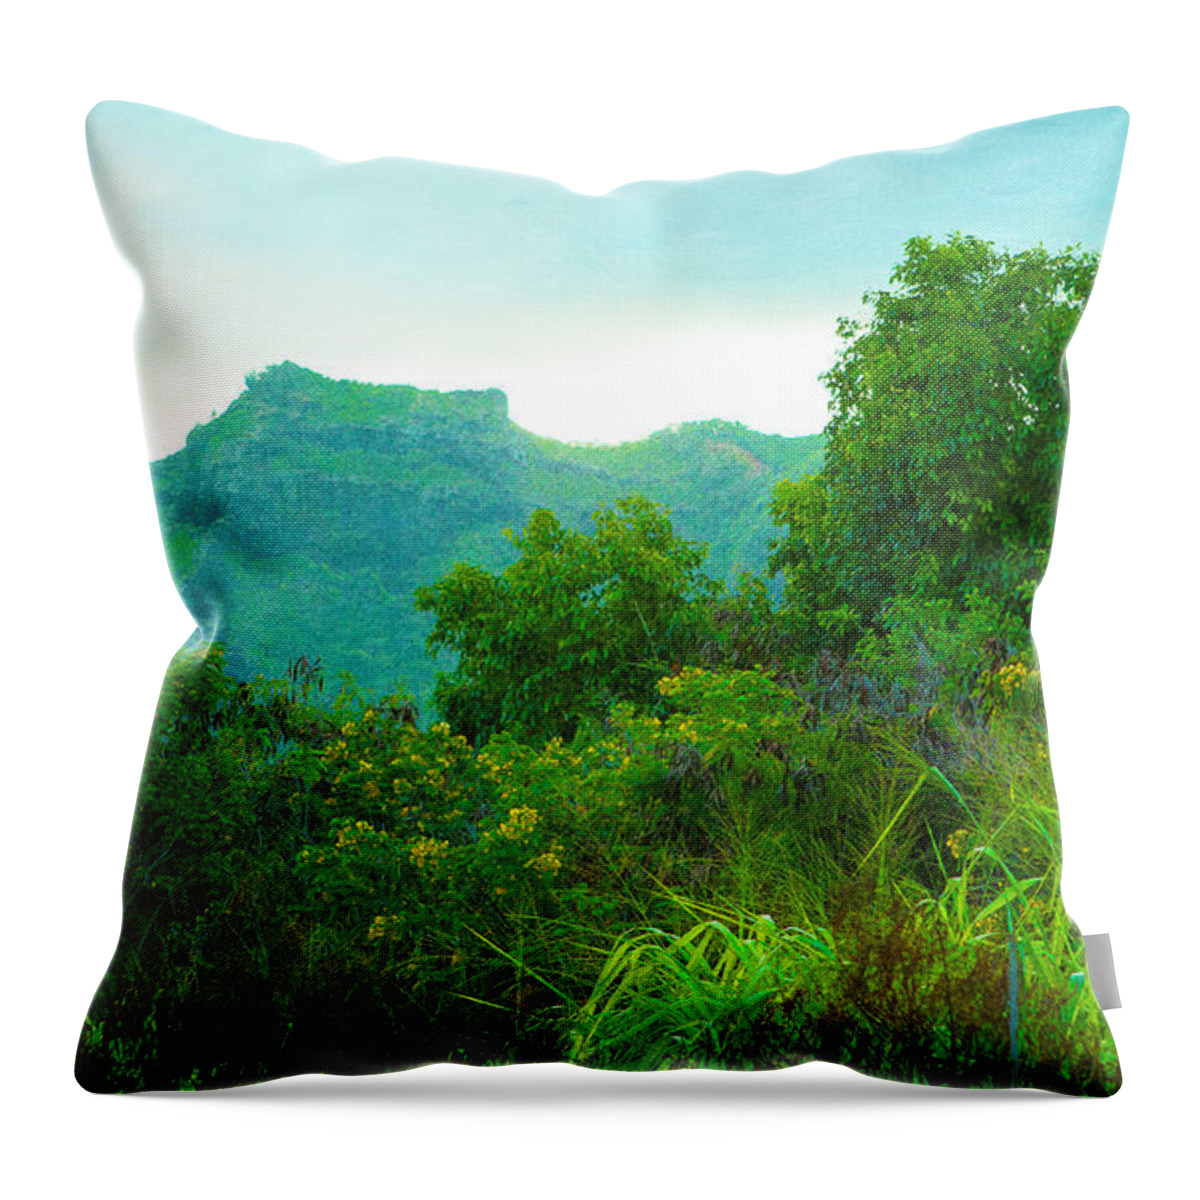 Kauai Throw Pillow featuring the photograph Sleeping Giant by Roselynne Broussard